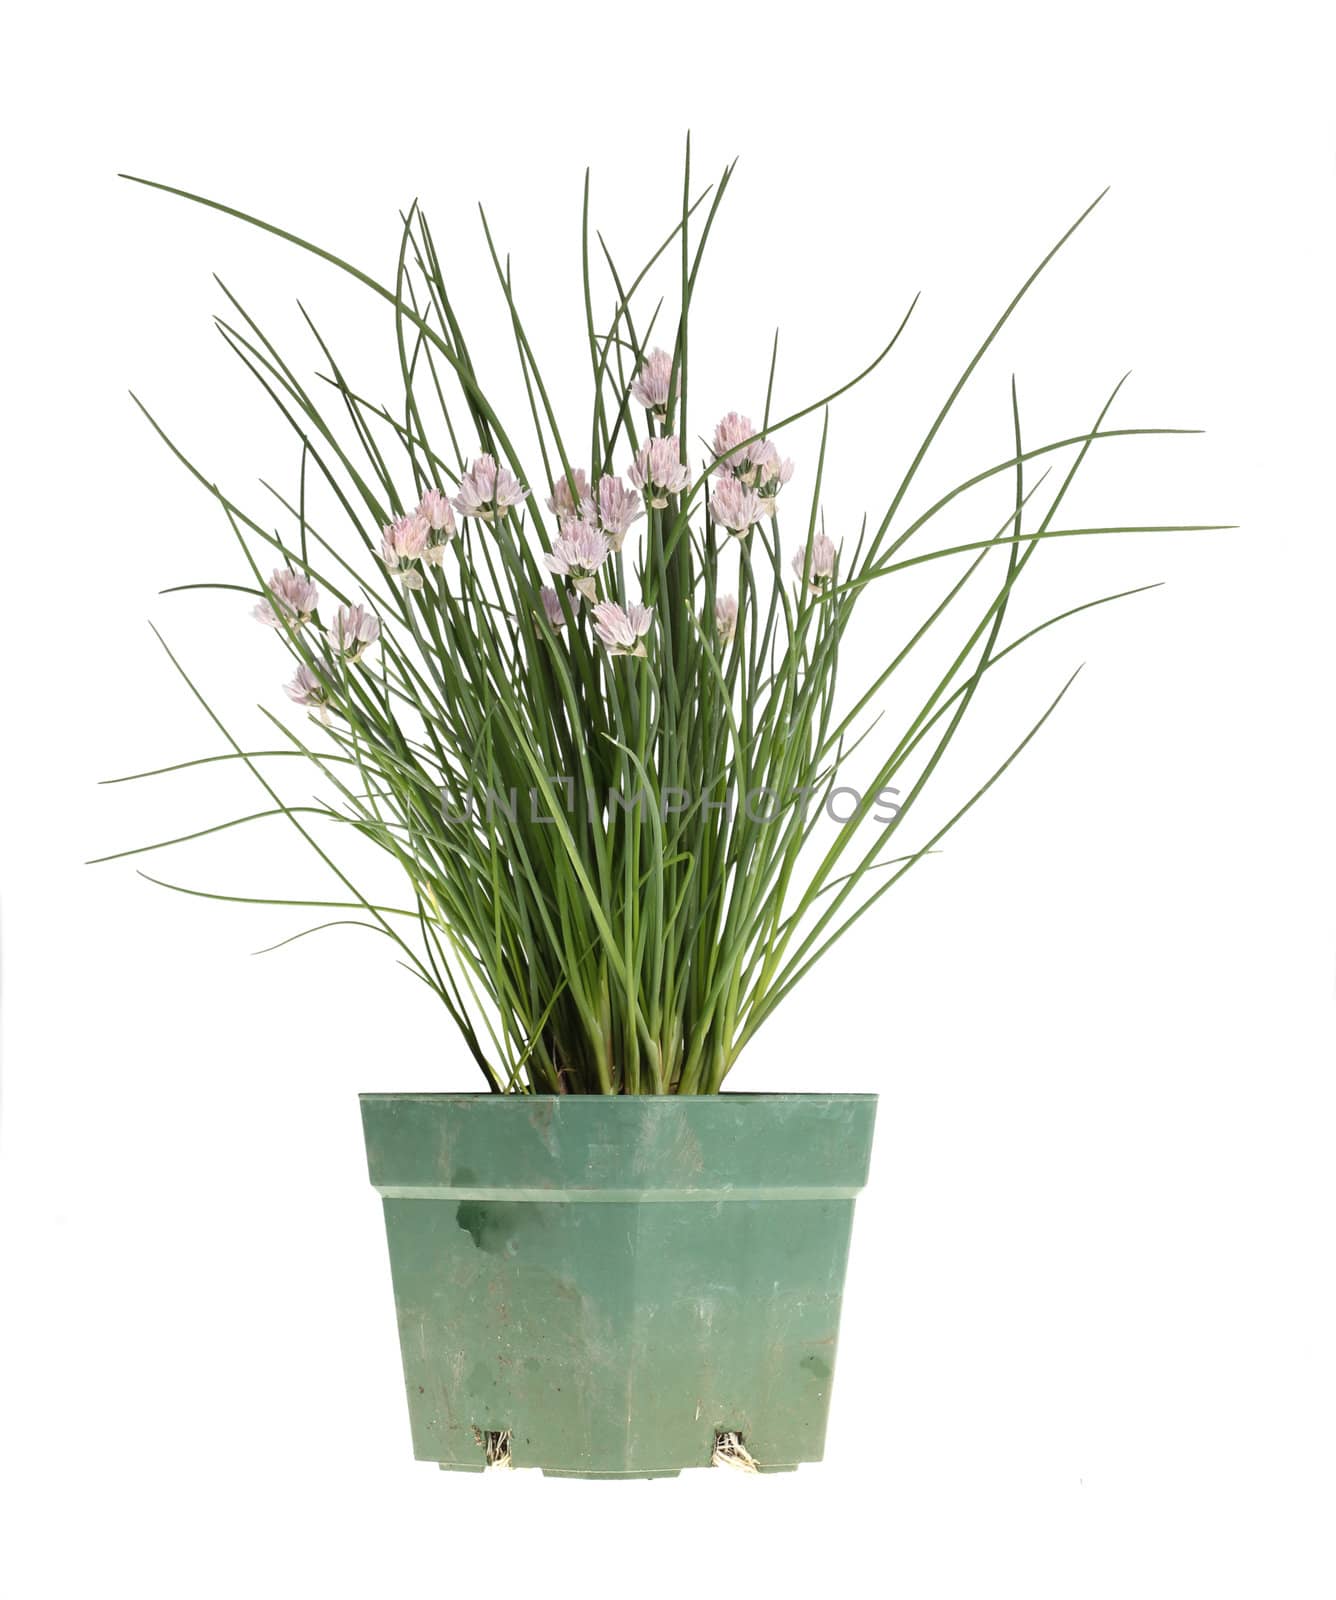 Chives in a green plastic pot by sgoodwin4813